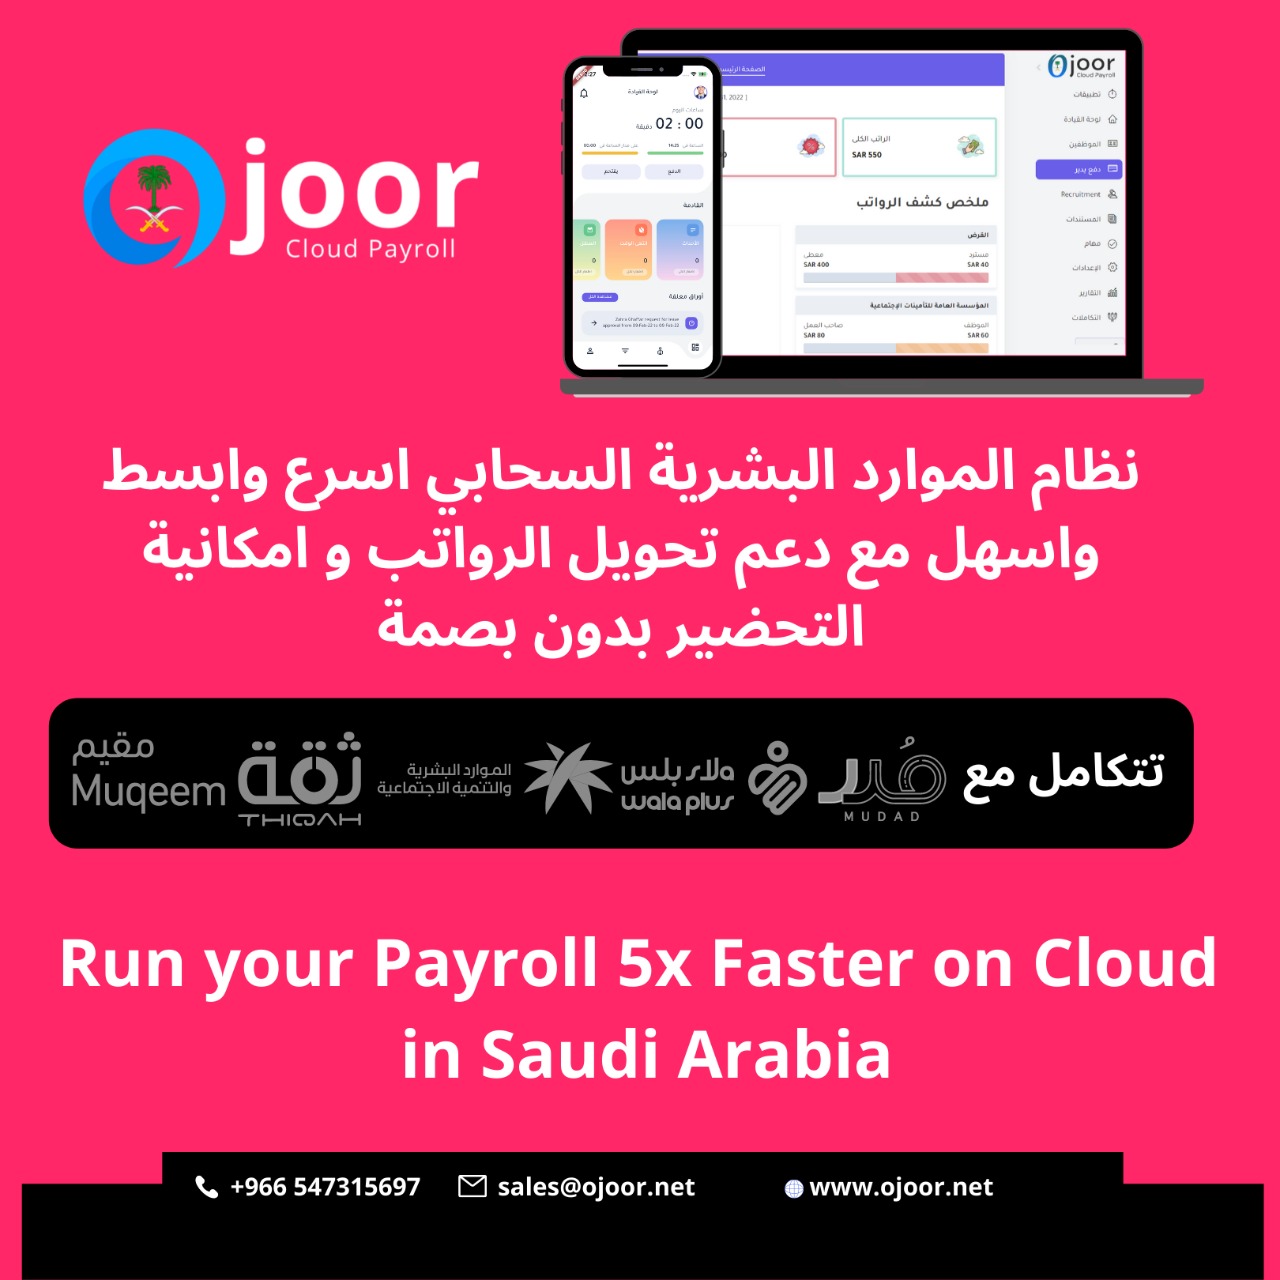 Which are the Essential functions of a Payroll System in Saudi?